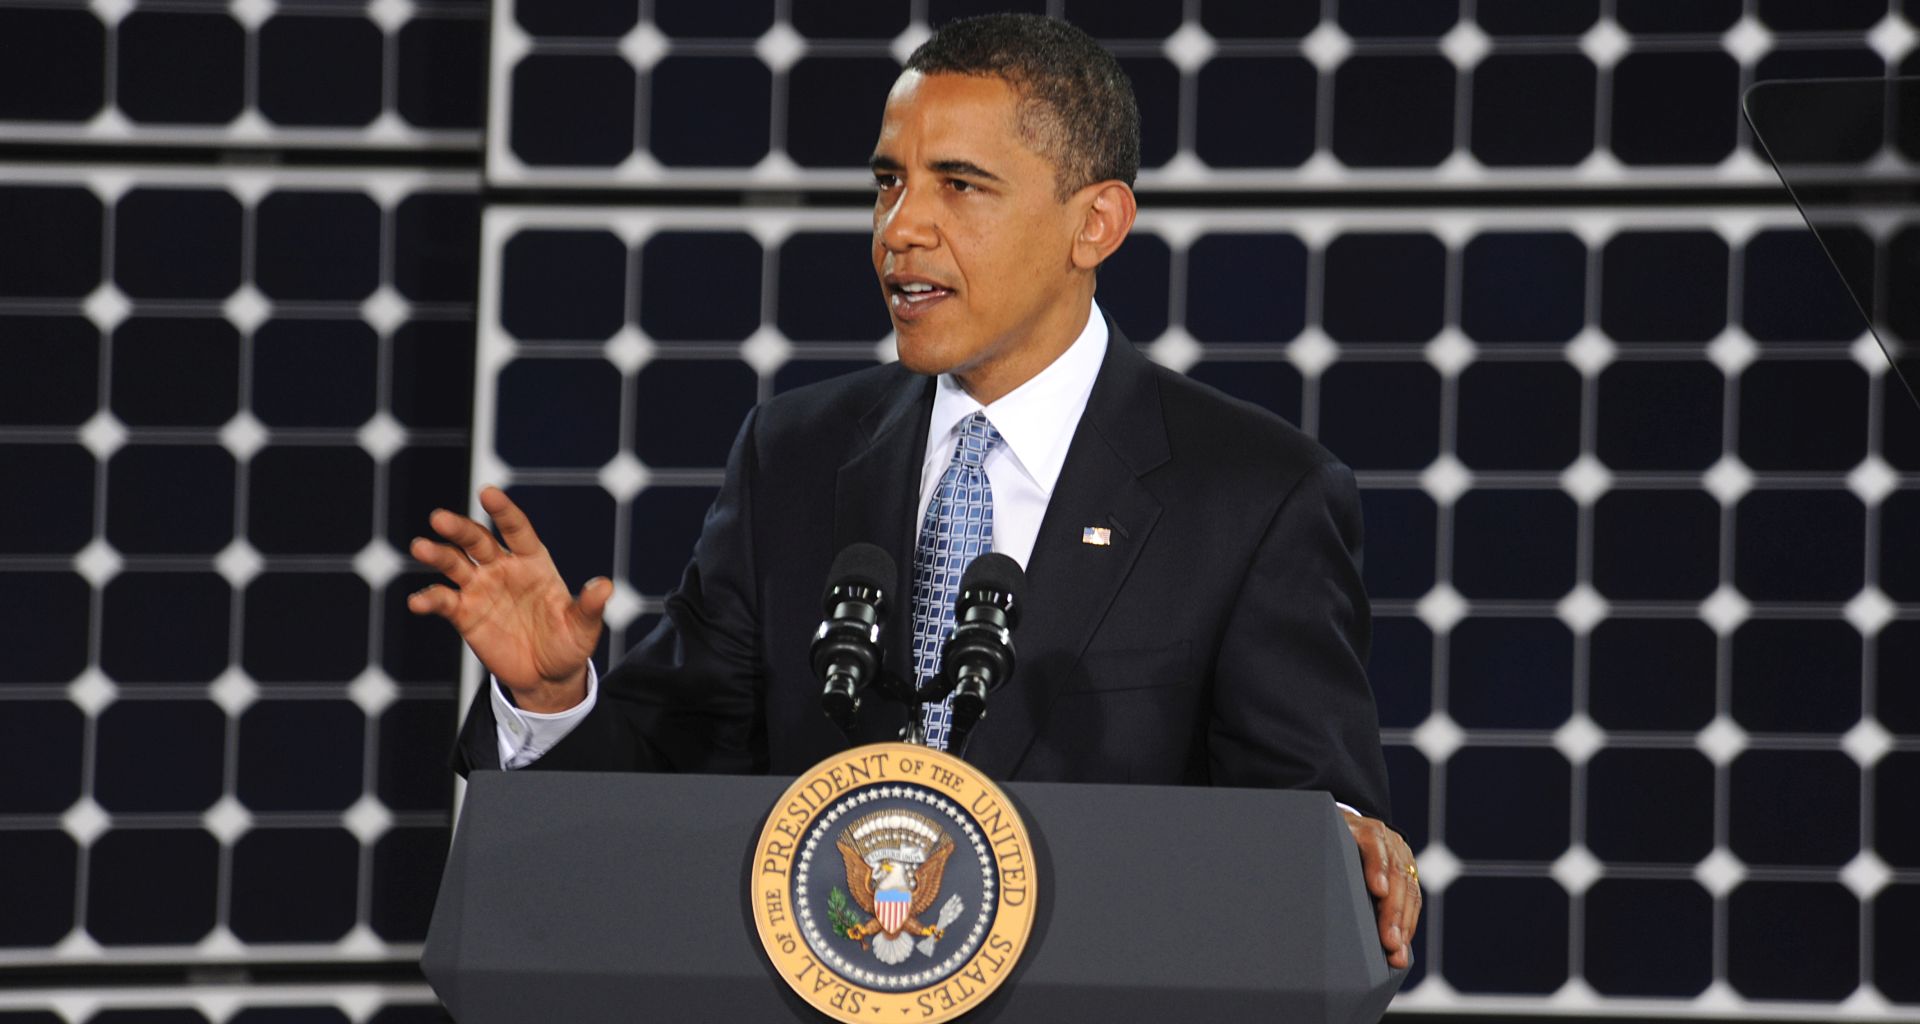 President Obama speaks to the Airman of Nellis Air Force Base Nev. during a visit to Las Vegas. The president spoke about issues concerning world energy and the importance of solar power. (U.S. Air Force Photo/Senior Airman Brian Ybarbo, released)